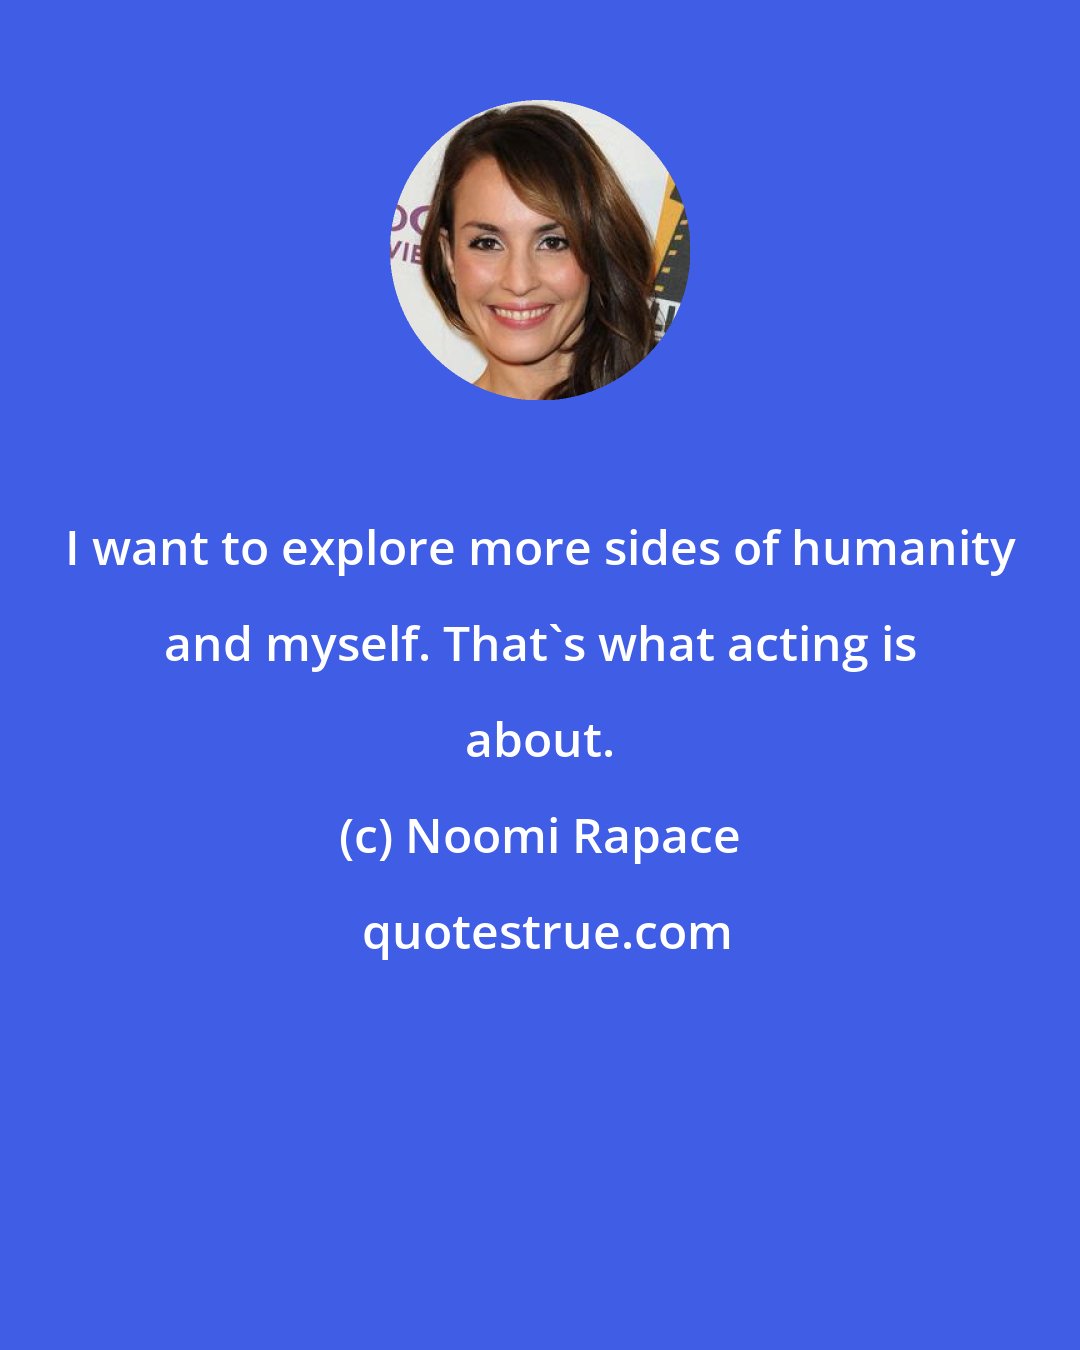 Noomi Rapace: I want to explore more sides of humanity and myself. That's what acting is about.